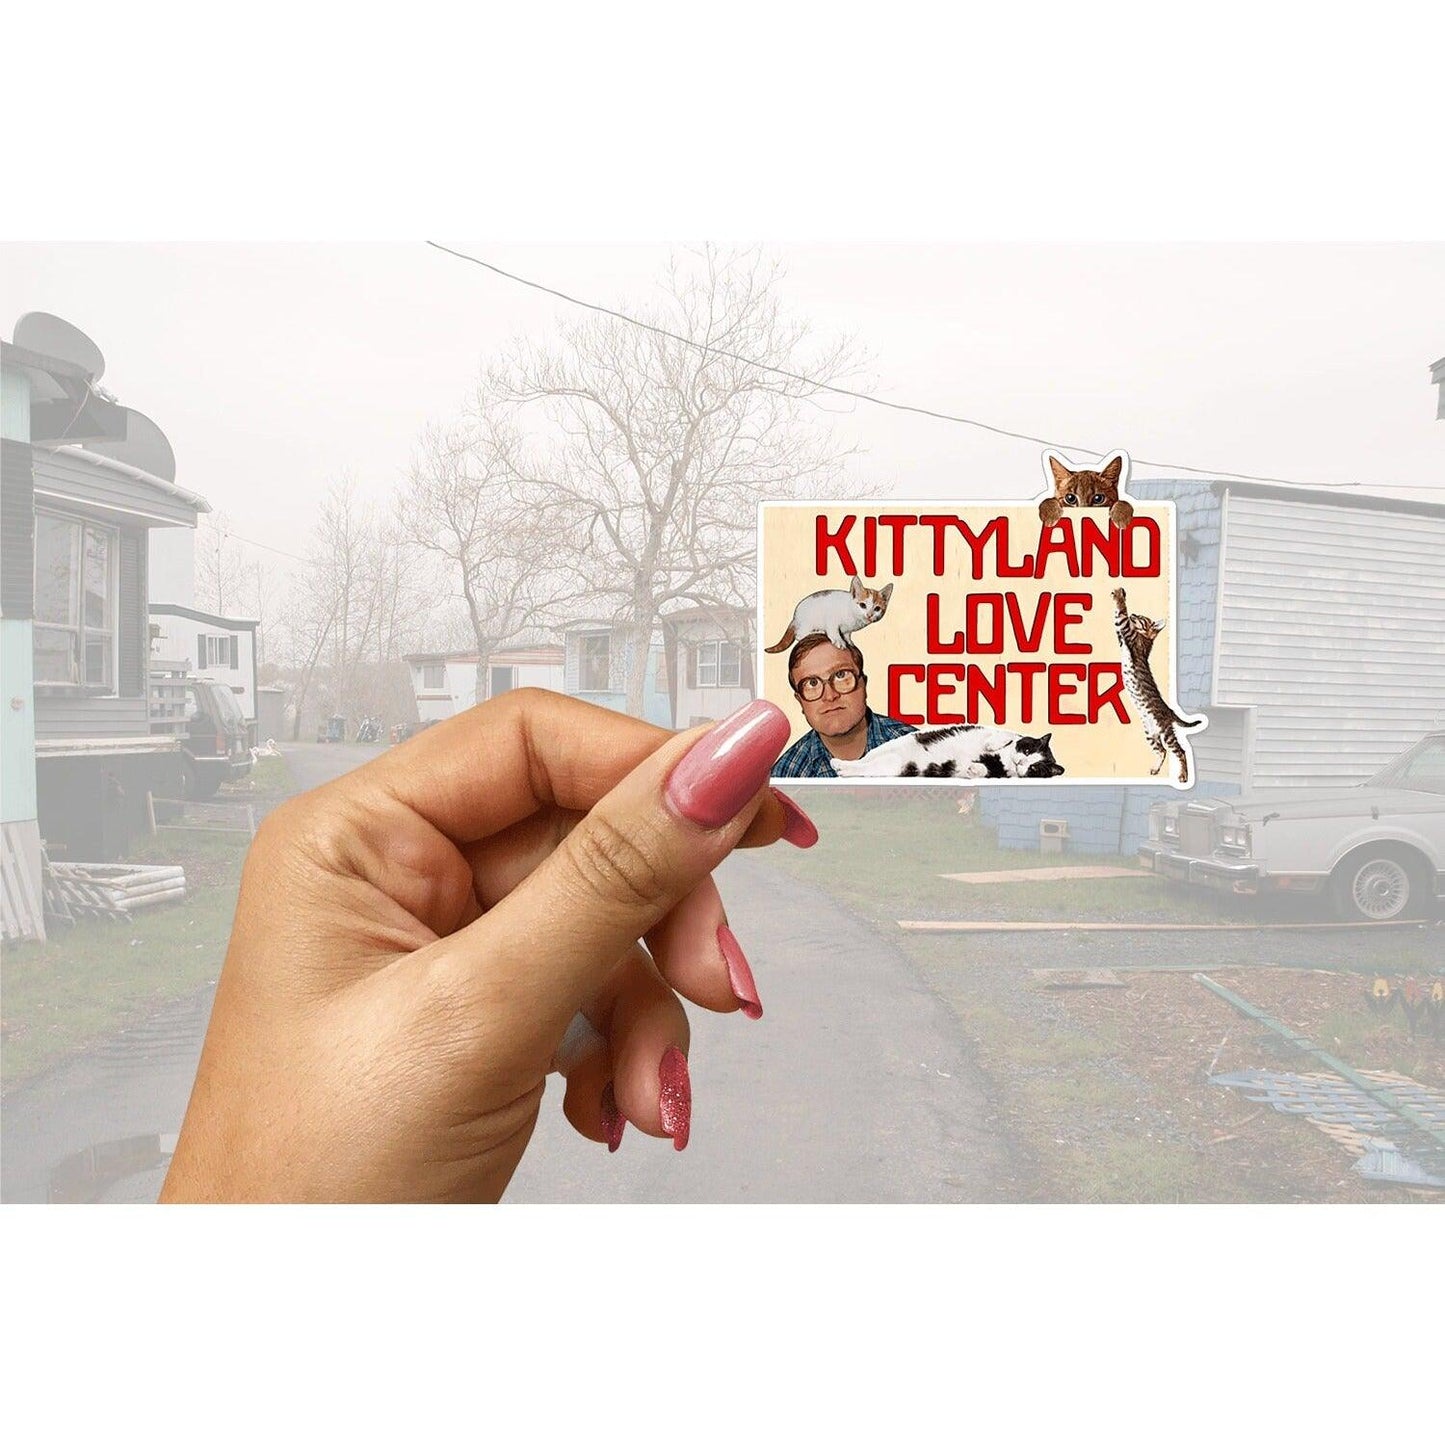 Trailer Park Boys Sticker Pack | Officially Licensed Bubbles Decent Sticker and Kittyland Love Center for Kitties Sticker -2 Sticker Pack - Ottos Grotto :: Stickers For Your Stuff